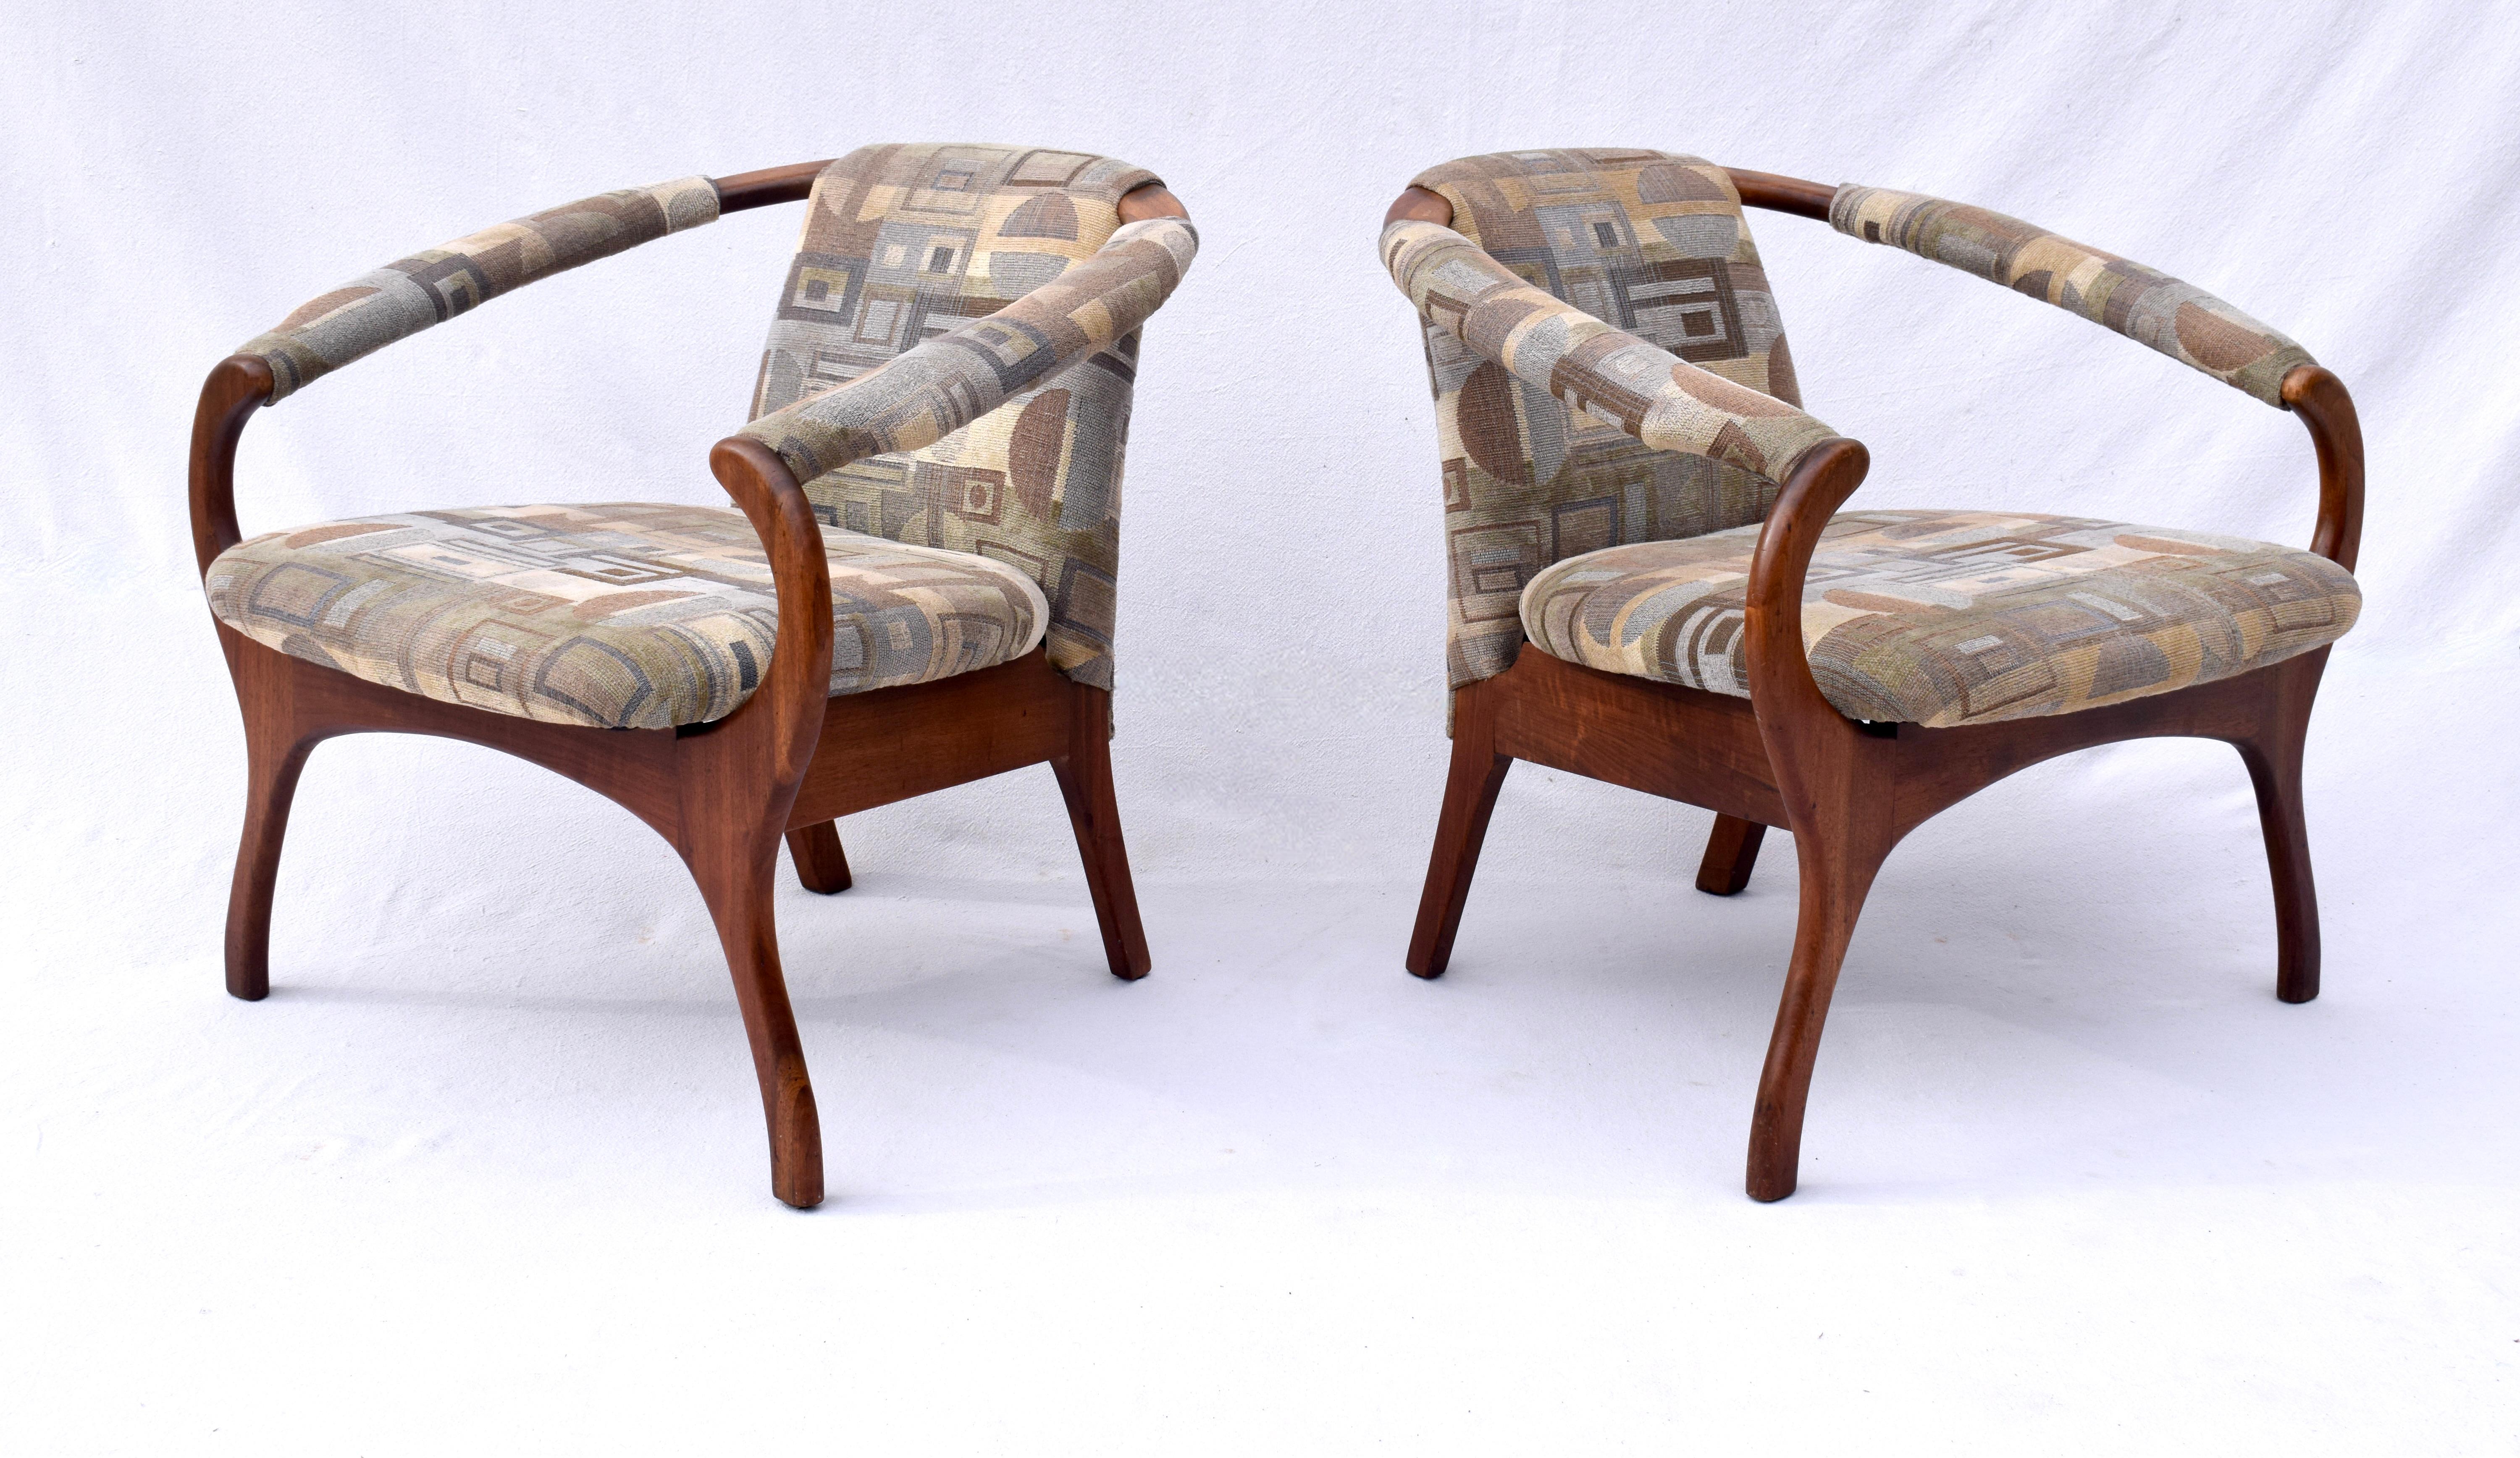 American Modern Sculptural Arm Chairs Attributed to Adrian Pearsall For Sale